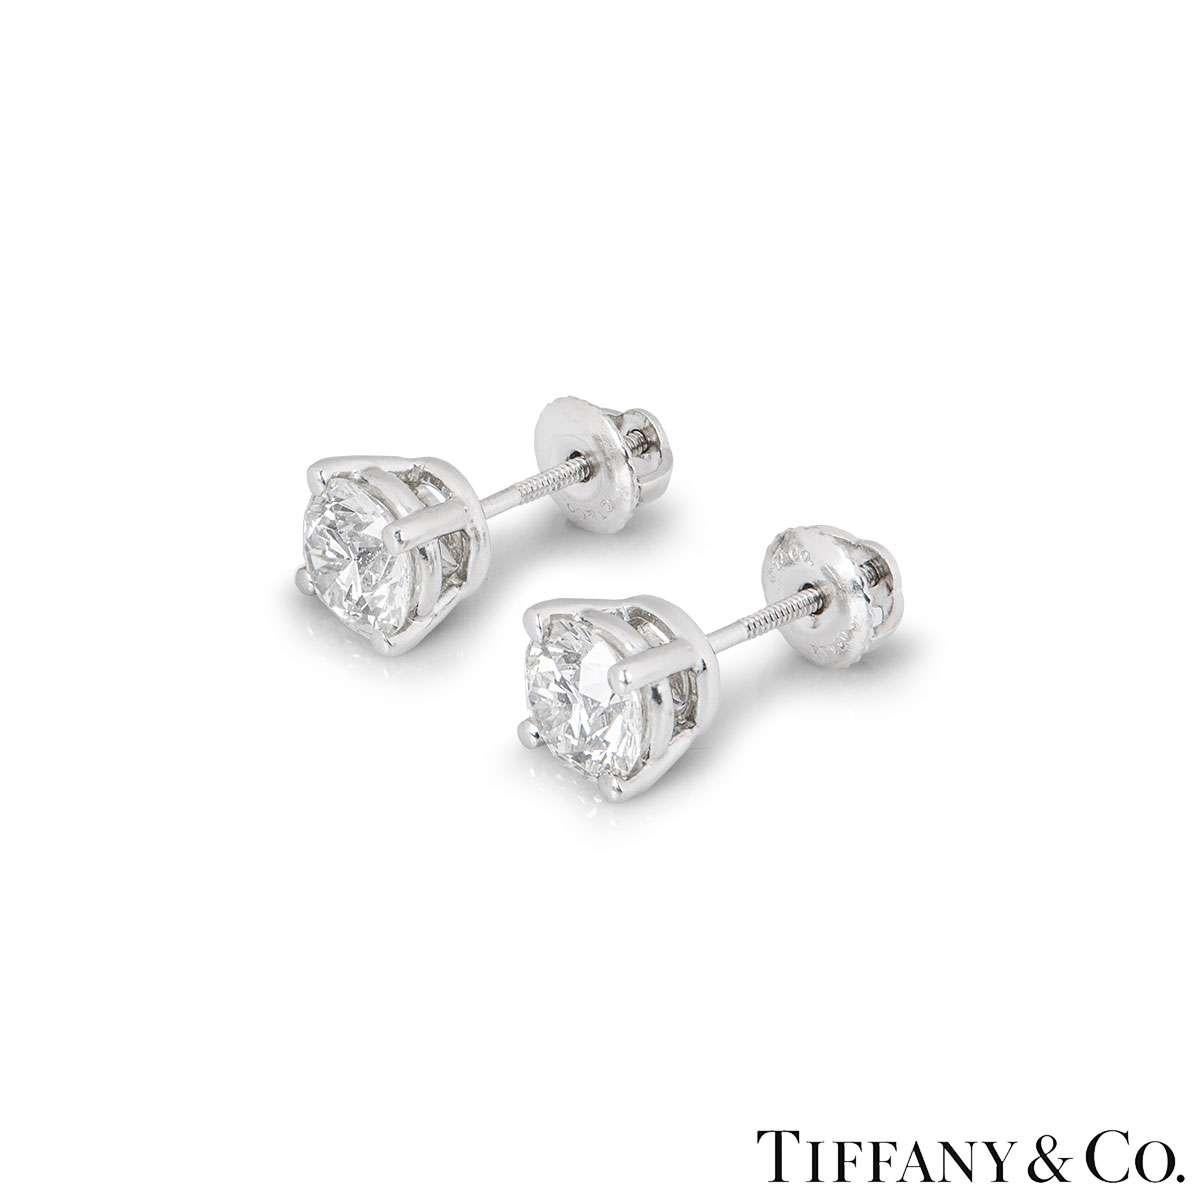 A stunning pair of platinum diamond ear studs by Tiffany & Co. Each earring is set with a round brilliant cut diamond in a four claw setting. Both diamonds have a weight of 1.01ct and are both H colour, one diamond is VS1 clarity and the other is